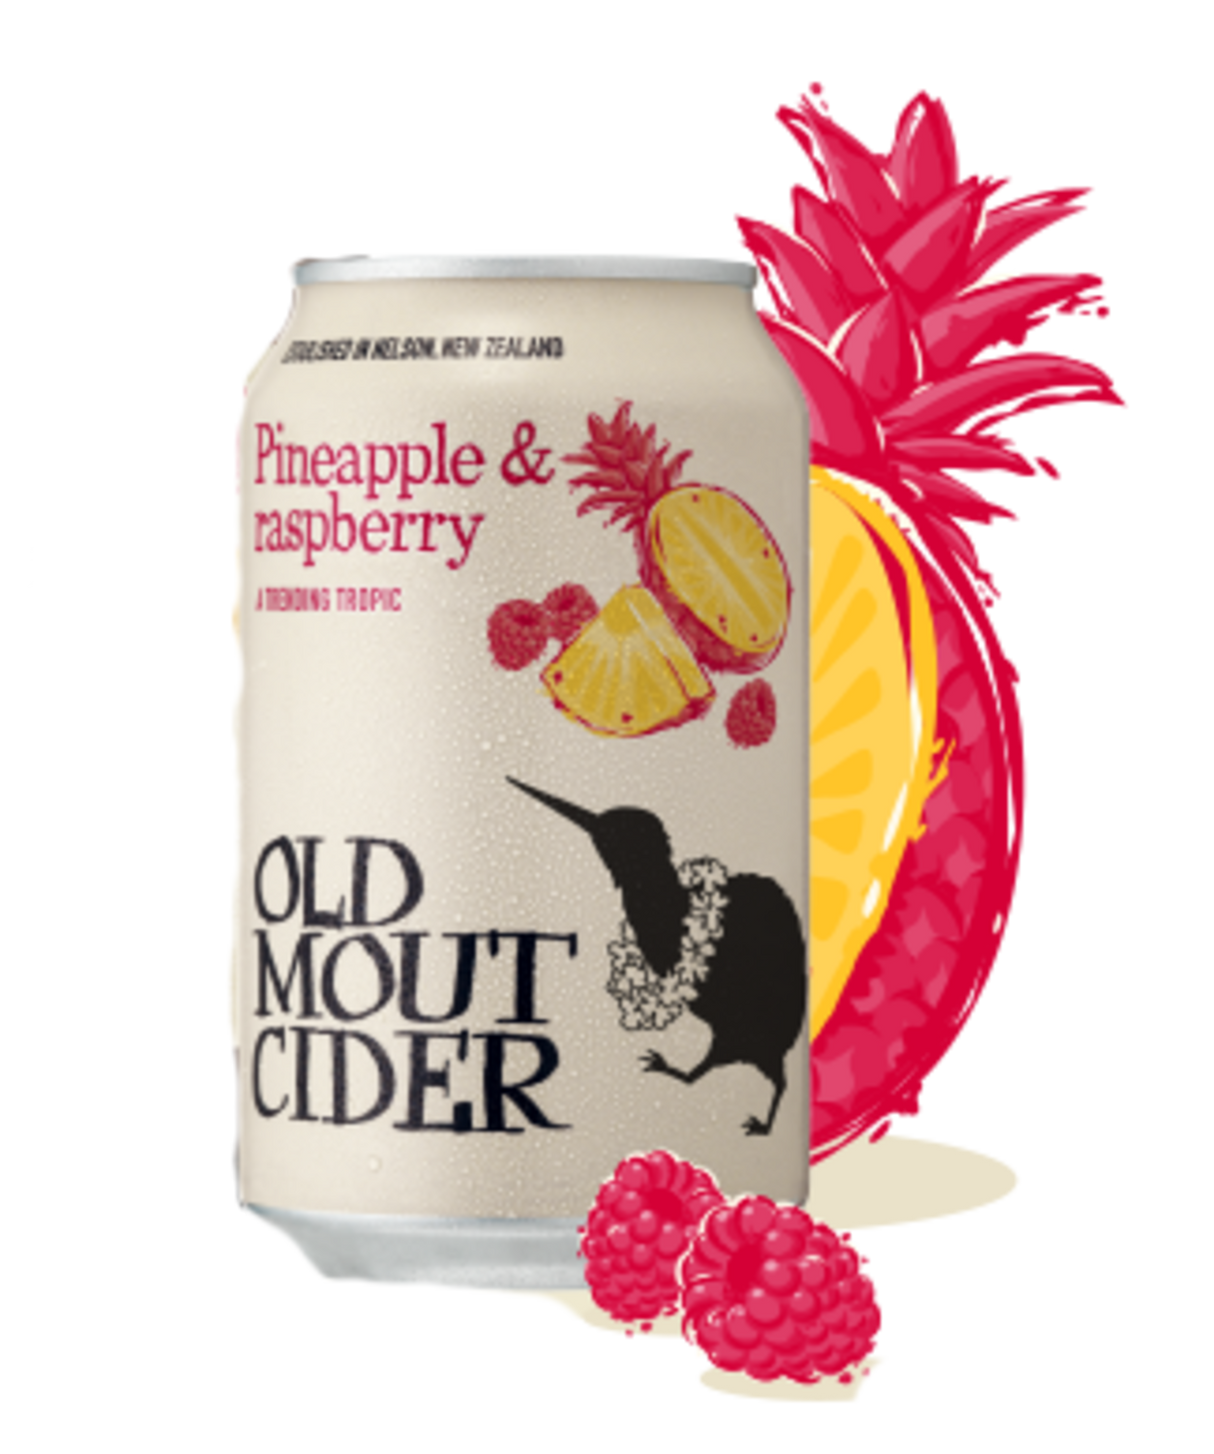 Old Mout Pineapple & Raspberry Cider 4.0% 330ml